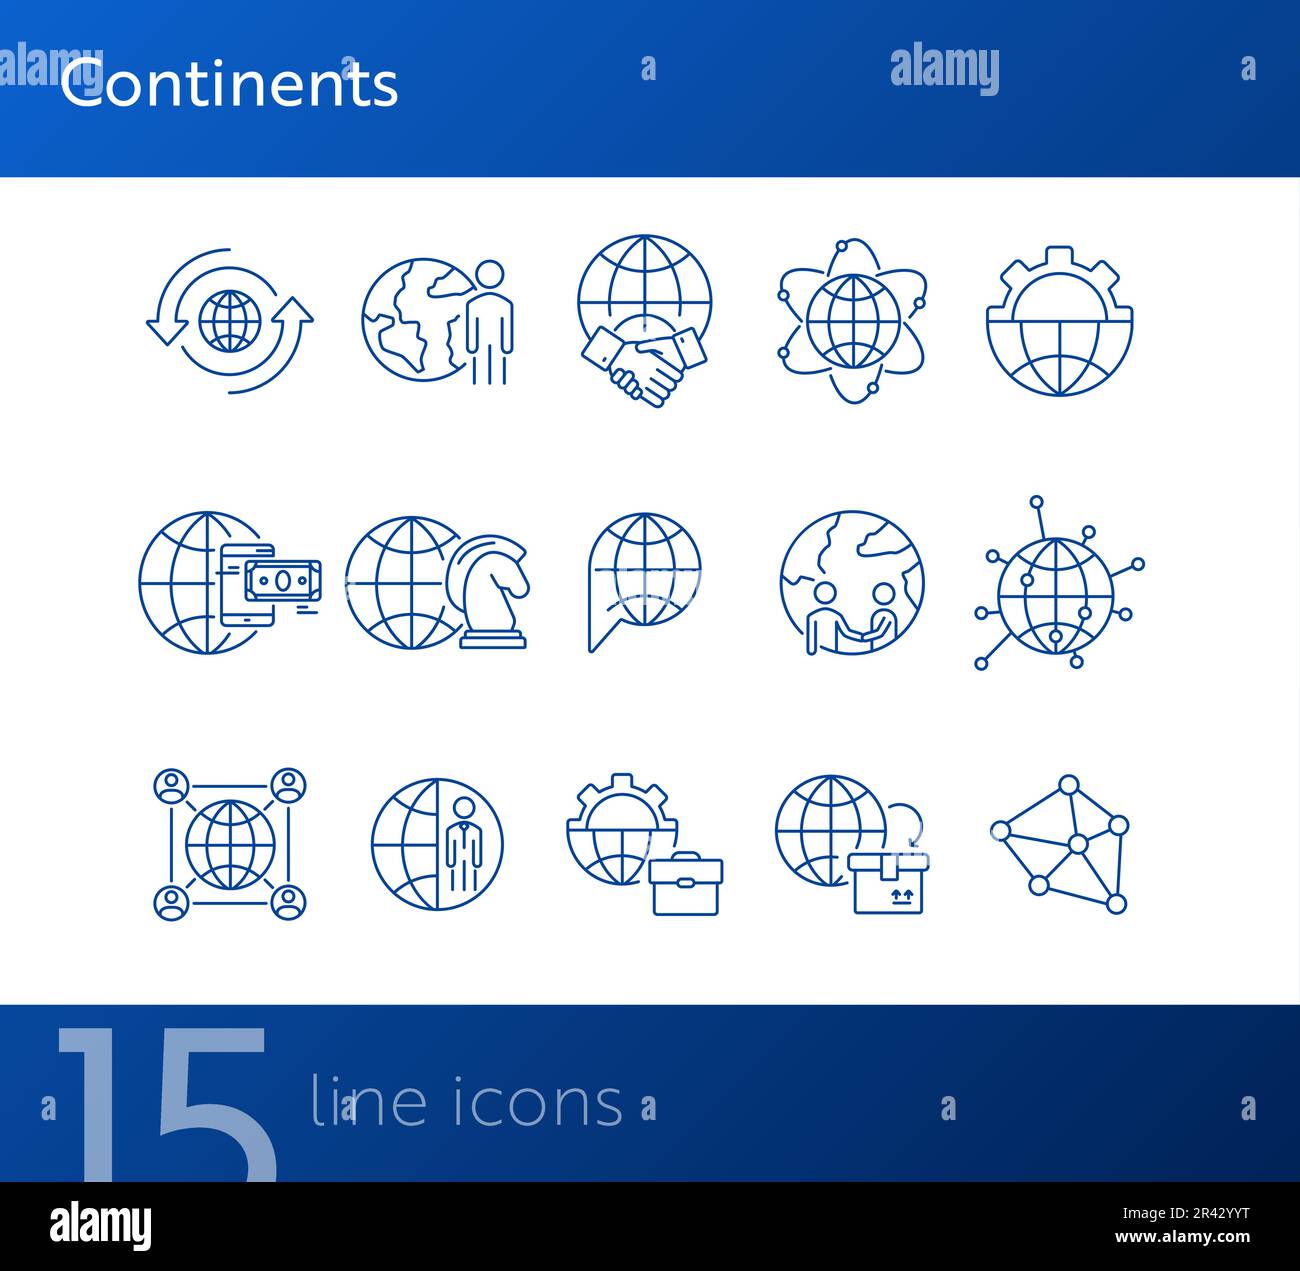 Continents line icon set Stock Vector